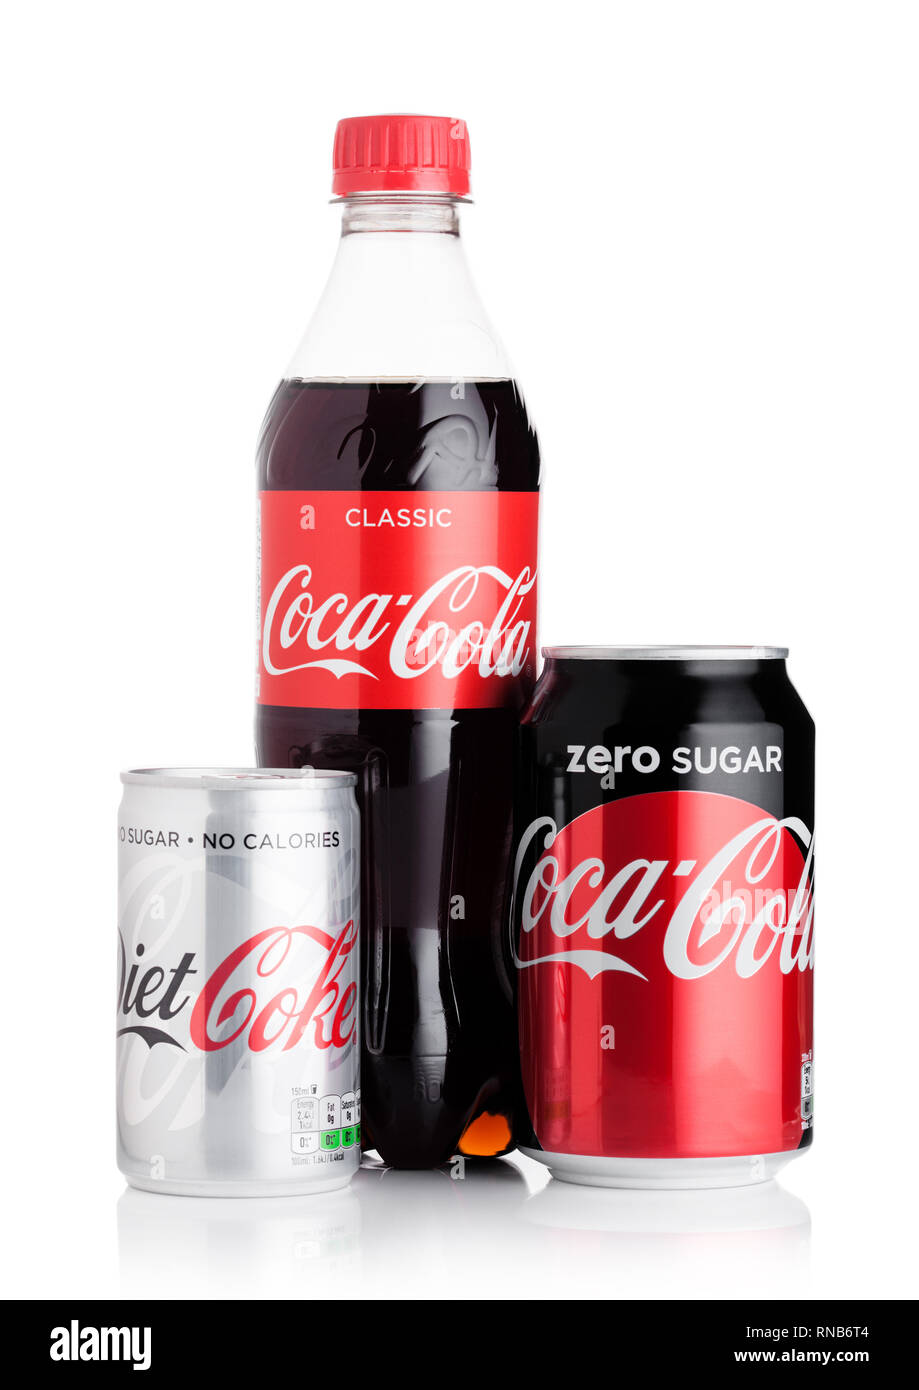 LONDON, UK - FEBRUARY 06, 2019: Bottle and aluminium cans of Original Coca Cola soft drink on white. Stock Photo